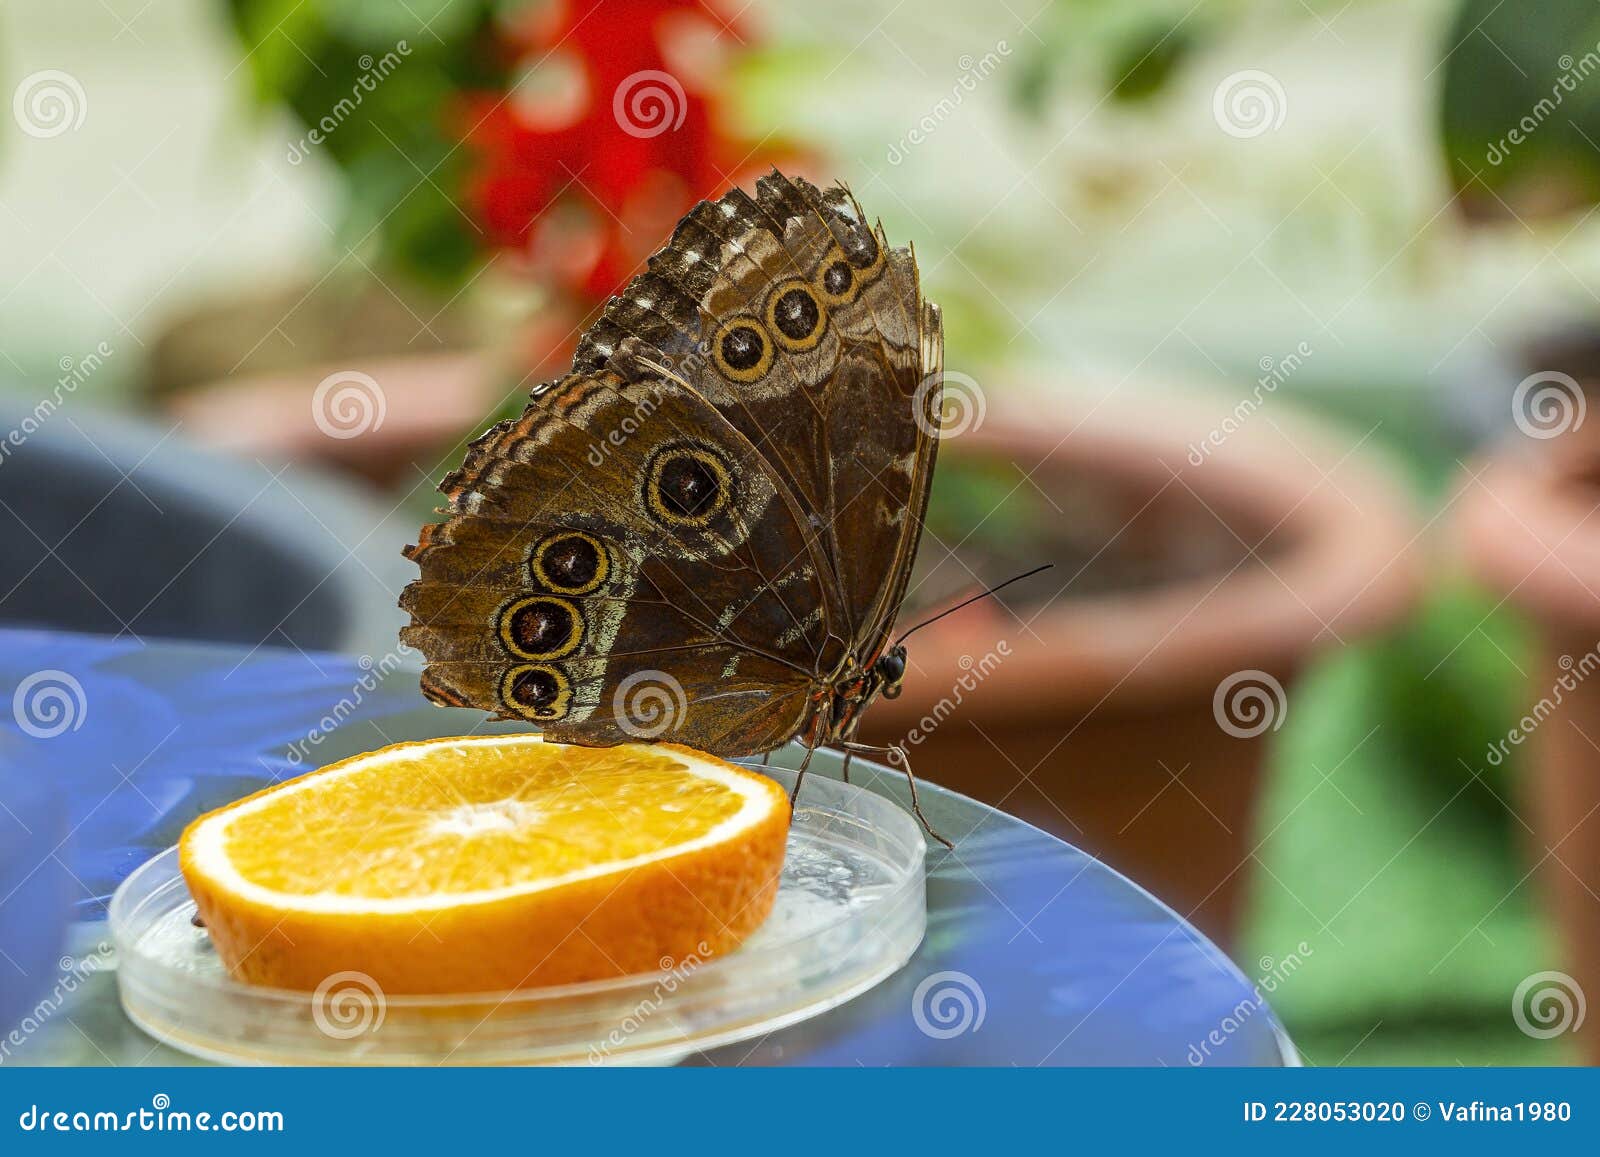 morpho menelaus is species of butterflies of genus morpho from family nymphalidae. beautiful butterfly feeding fruit in the park